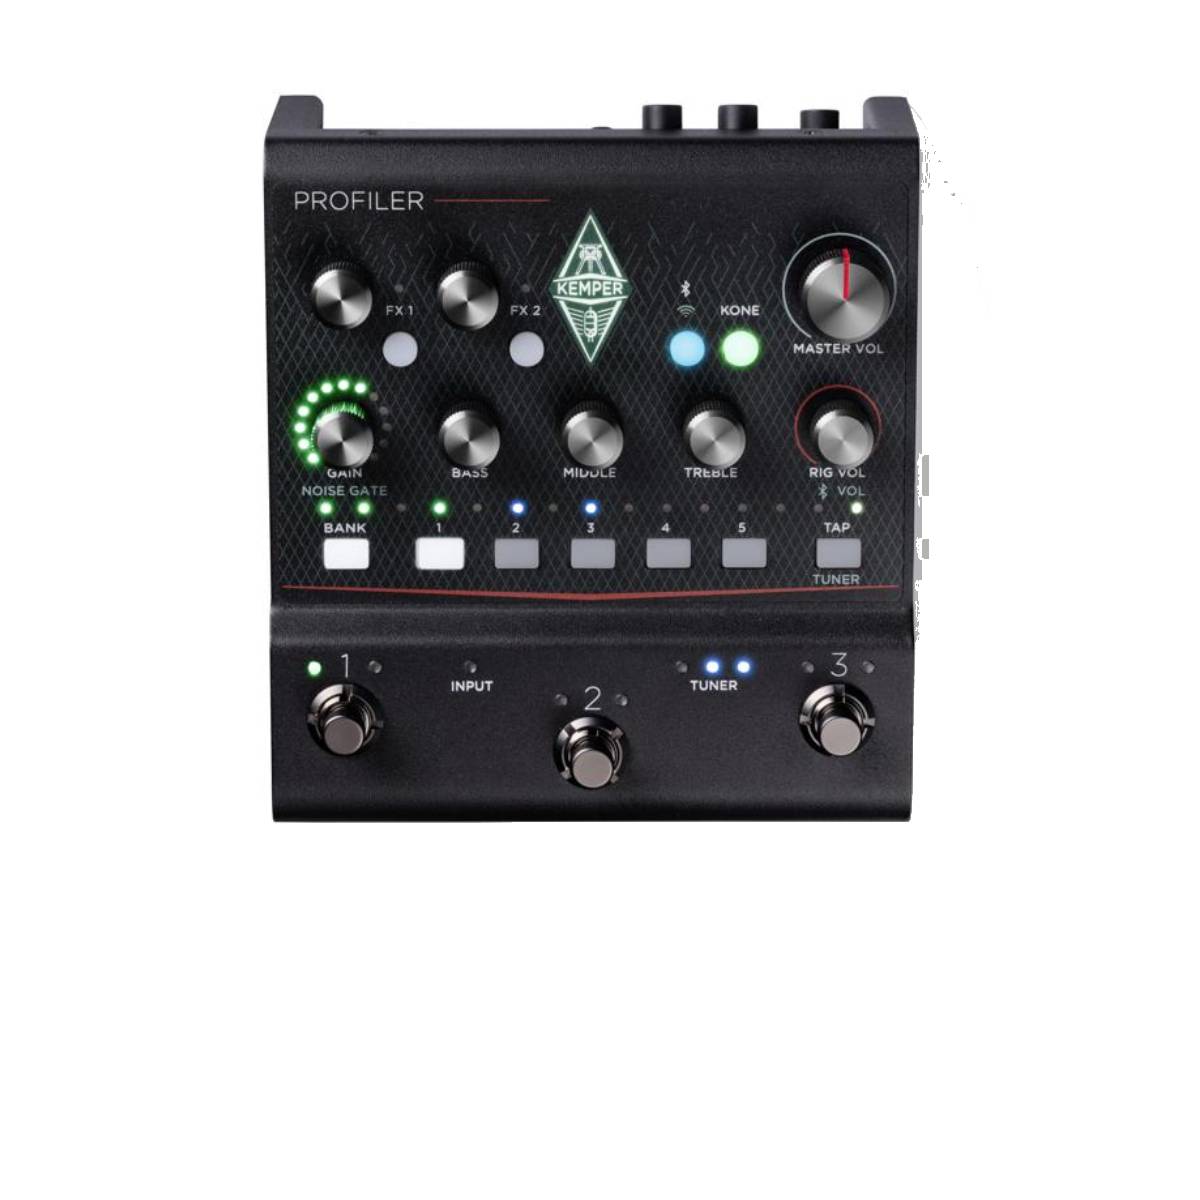 Kemper Profiler Player Amp Modeller and Effects Pedal